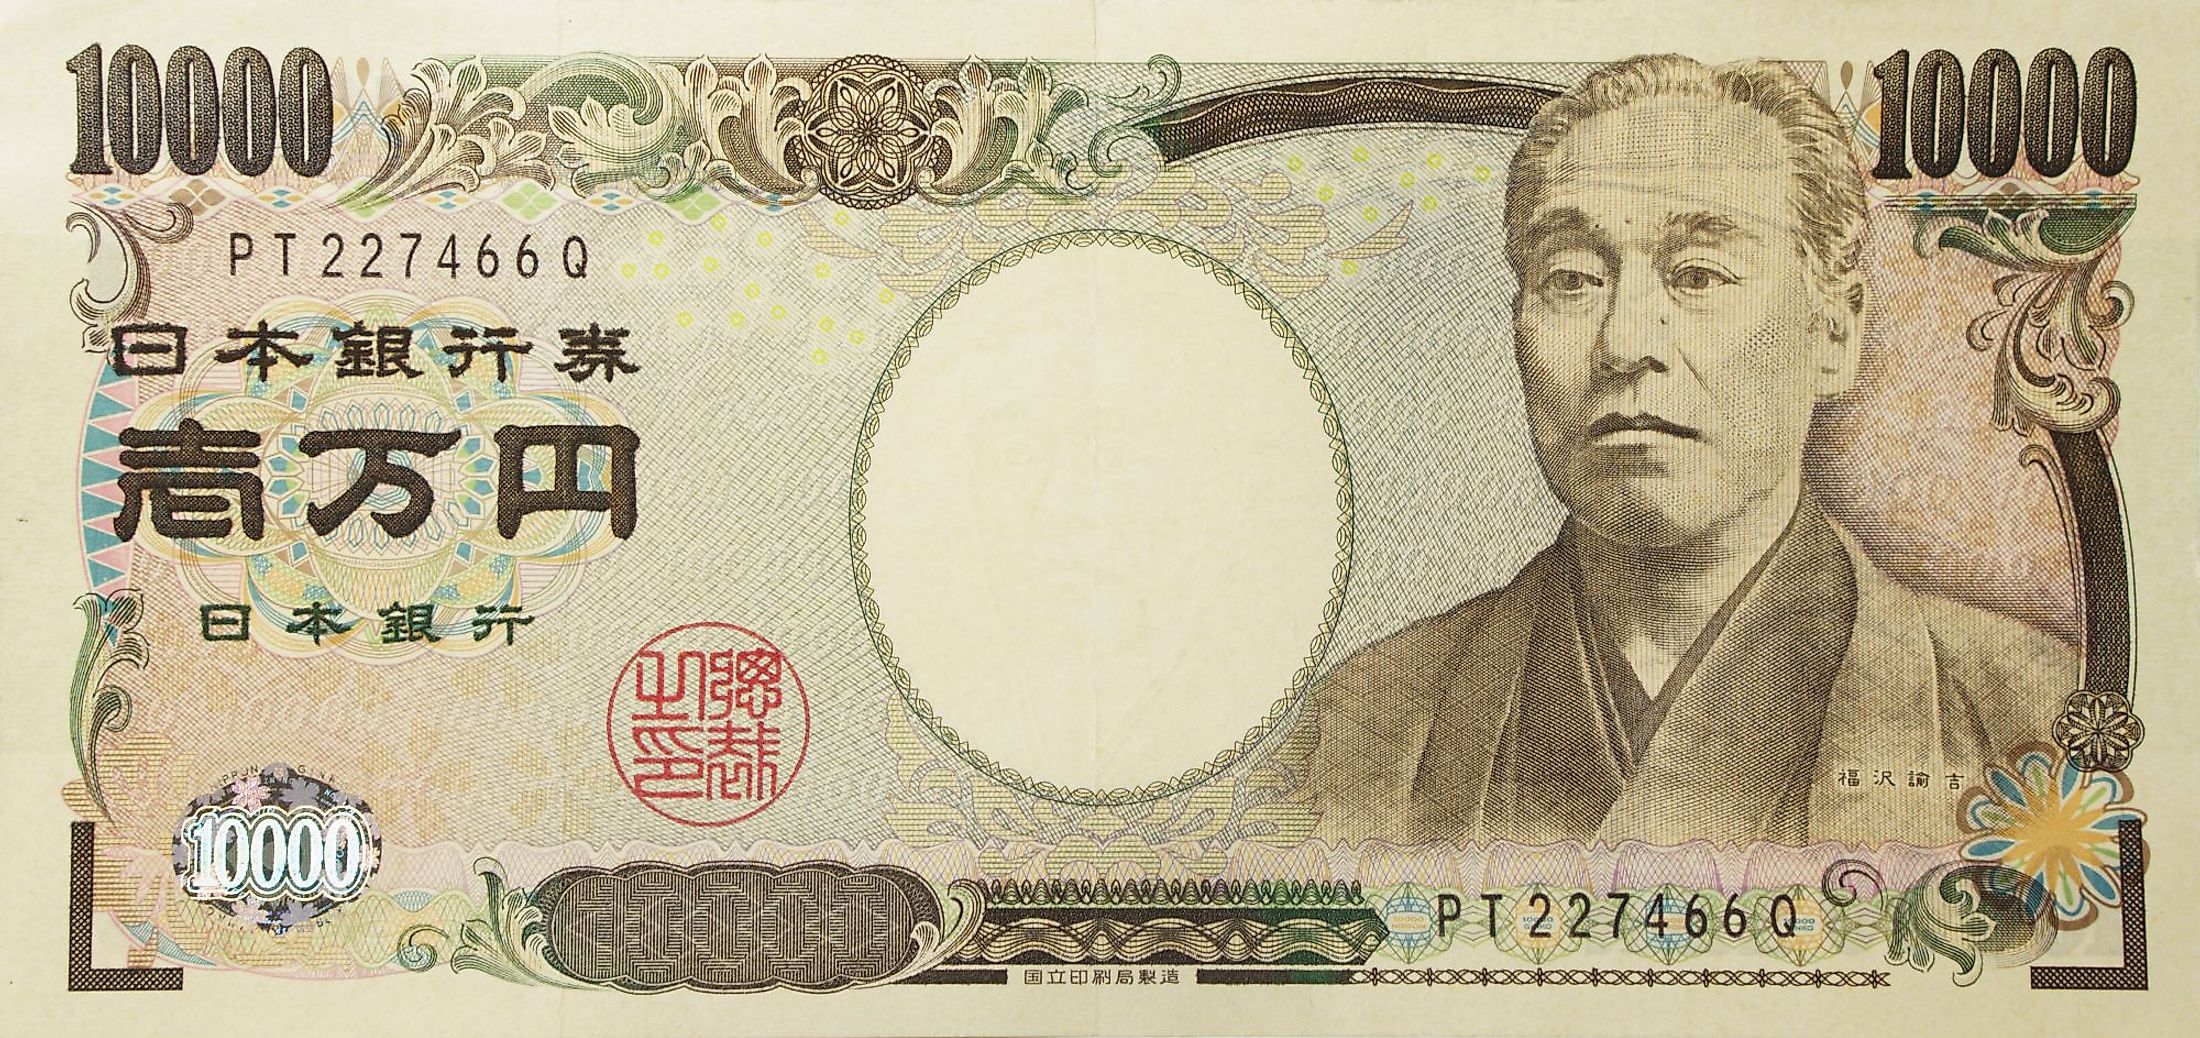 What is the Currency of Japan? - WorldAtlas